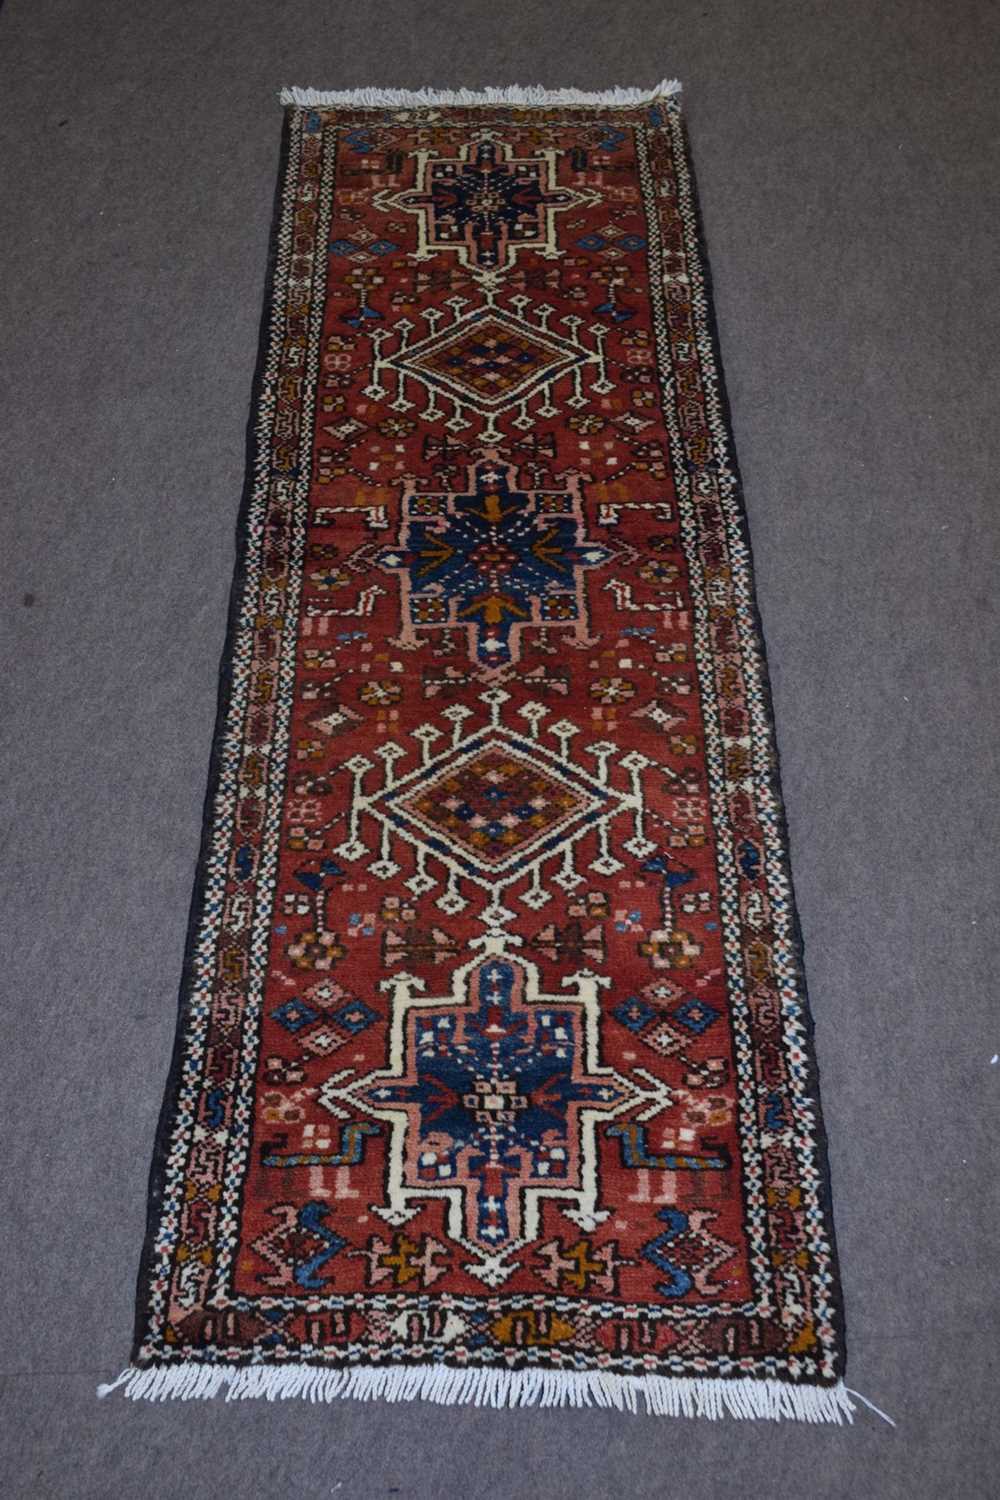 Small Karajeh runner carpet decorated with medallions on a red background, 175 x 60cm - Image 2 of 5